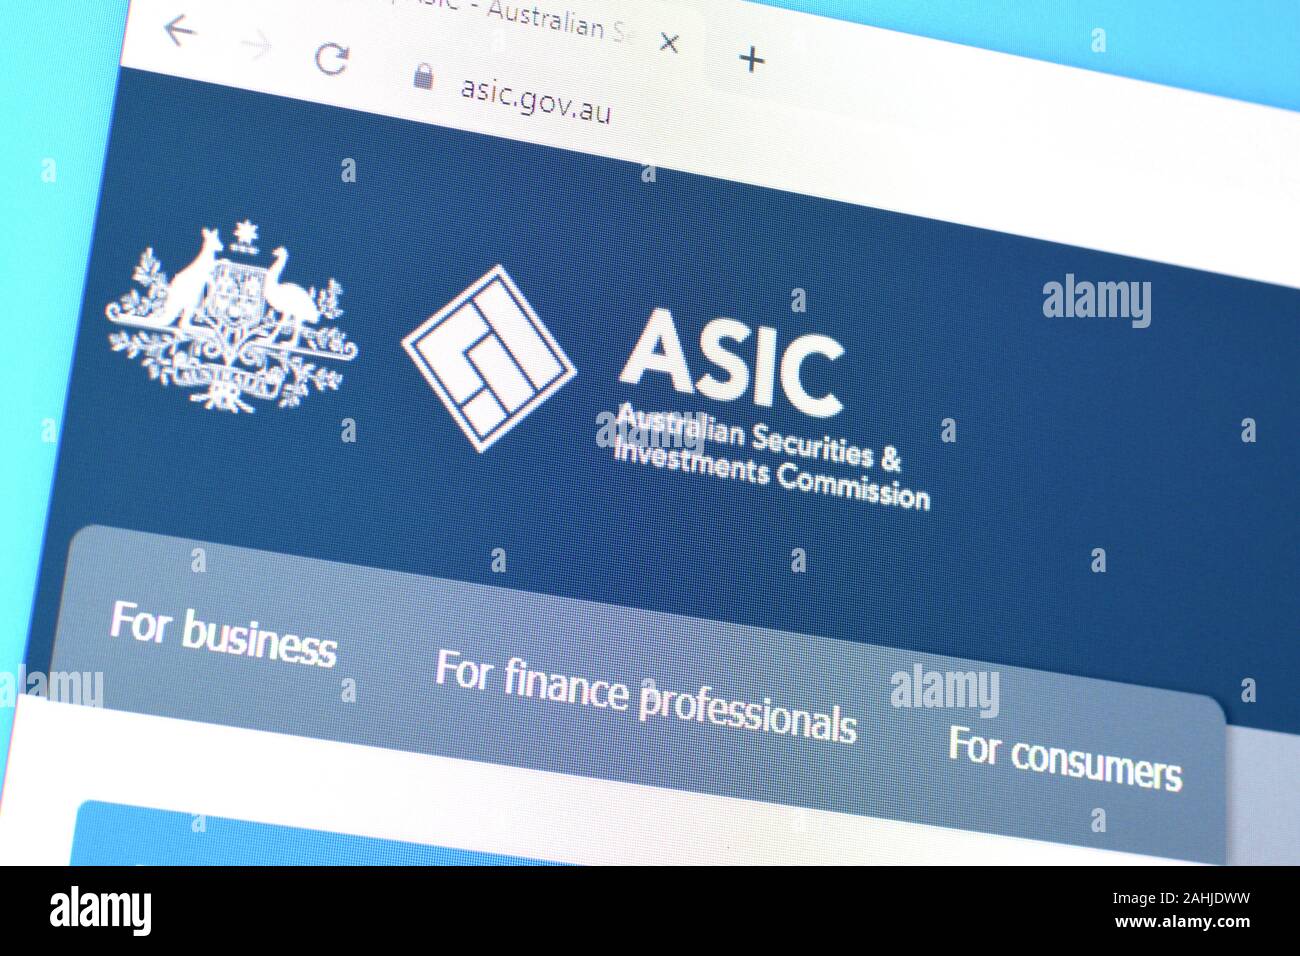 NY, USA - DECEMBER 16, 2019: Homepage of asic website on the display of PC,  url - asic.gov.au Stock Photo - Alamy